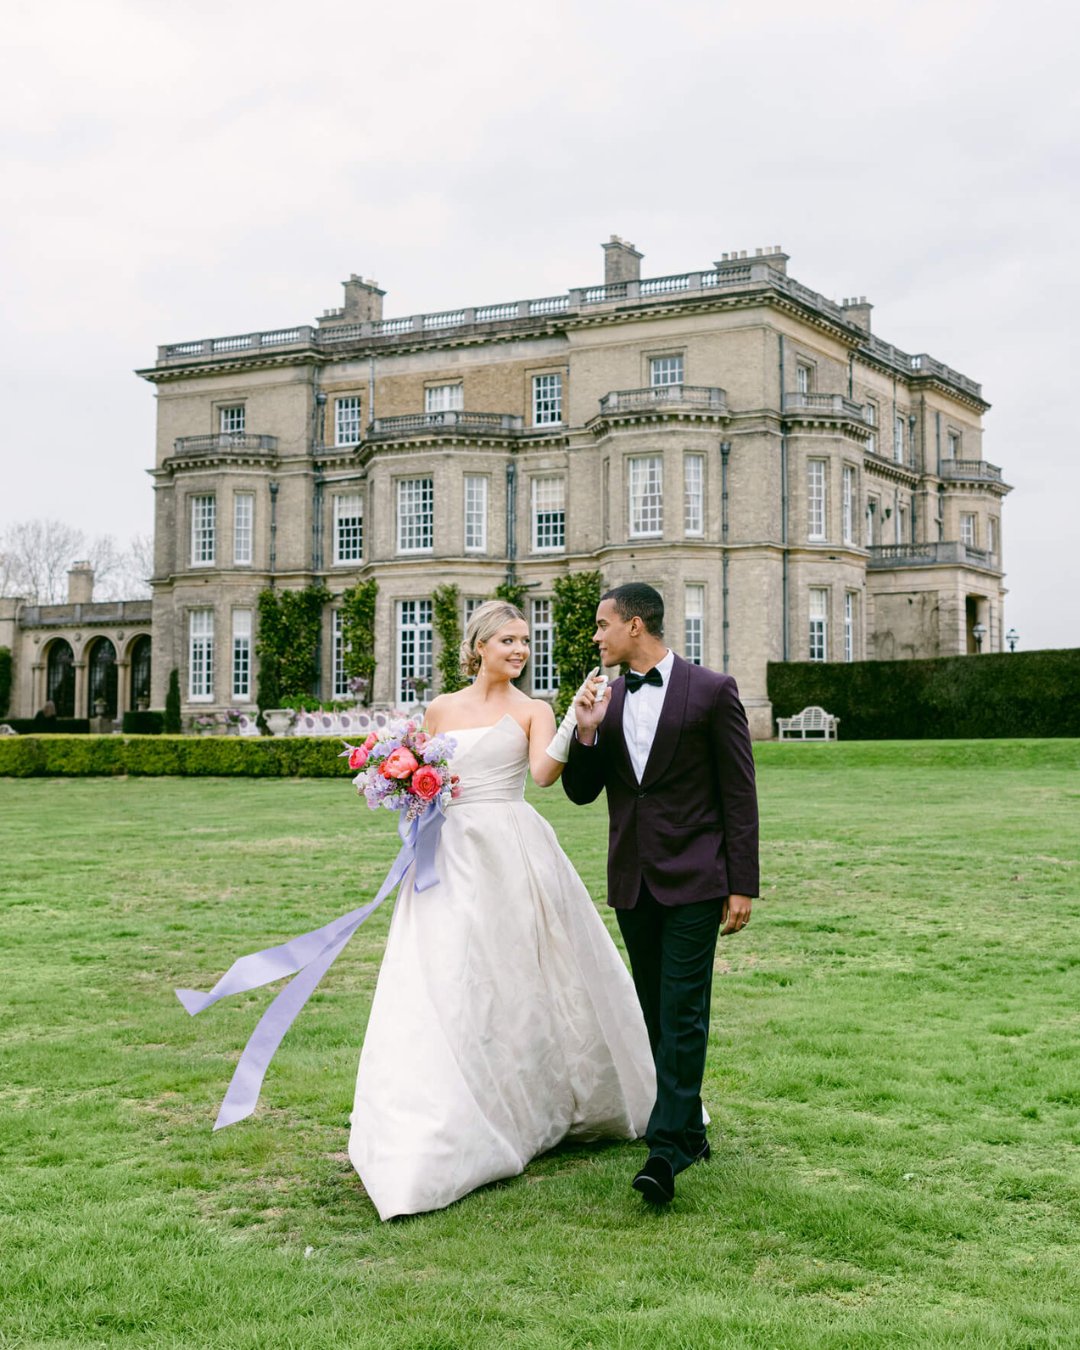 Wedding couple posing in front of Hedsor House in England.